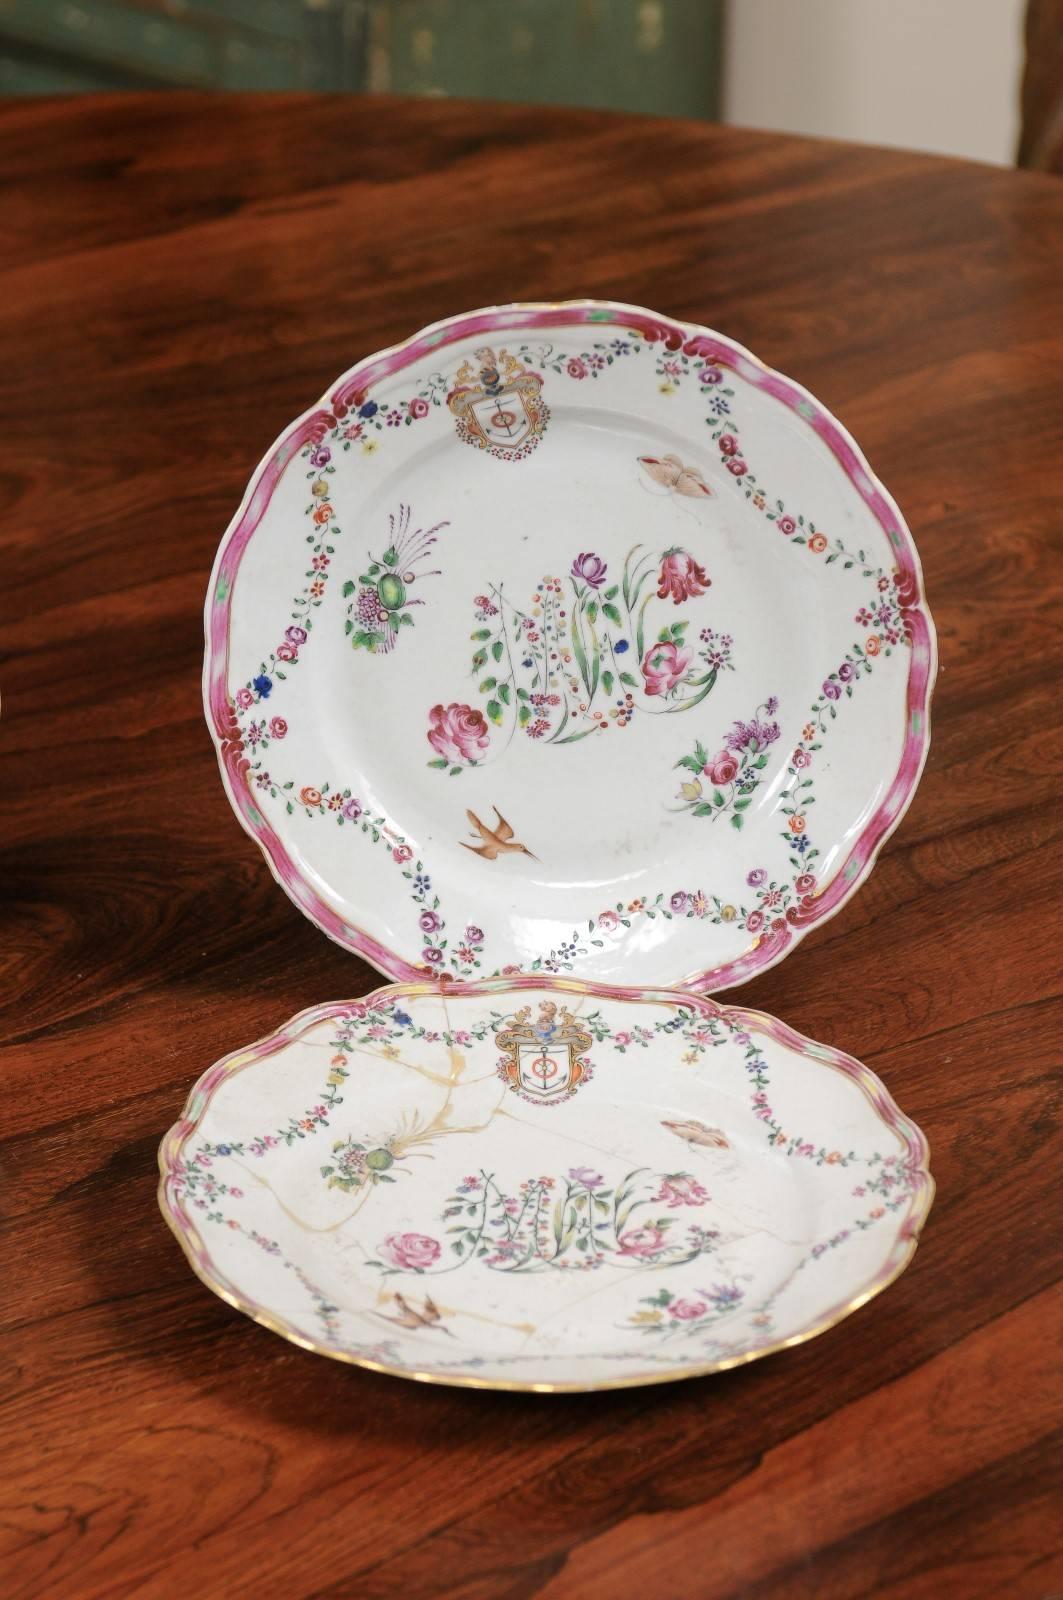 18th Century Set of 4 Chinese Export Porcelain Plates with Floral Decoration & Armorial Crest For Sale